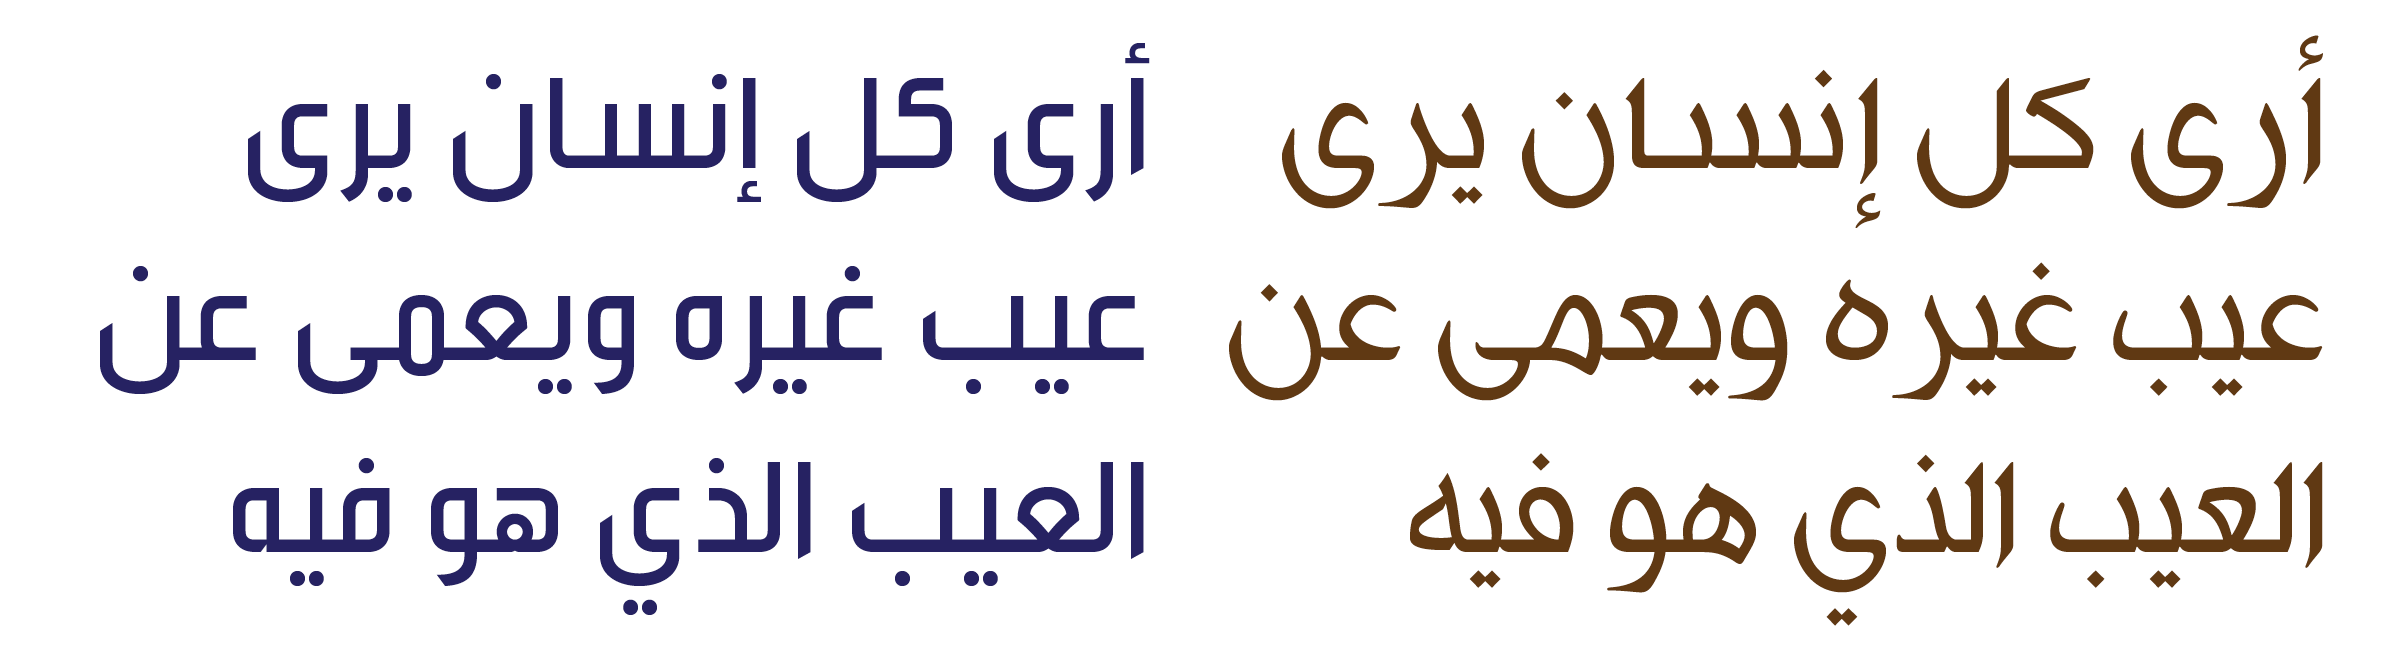 The same text set in the [Tanseek™](/families/tanseek) typeface, an Arabic script in Naskh style (right), and in [Tanseek™ Modern](/families/tanseek-modern), the companion font in Kufi style (left).